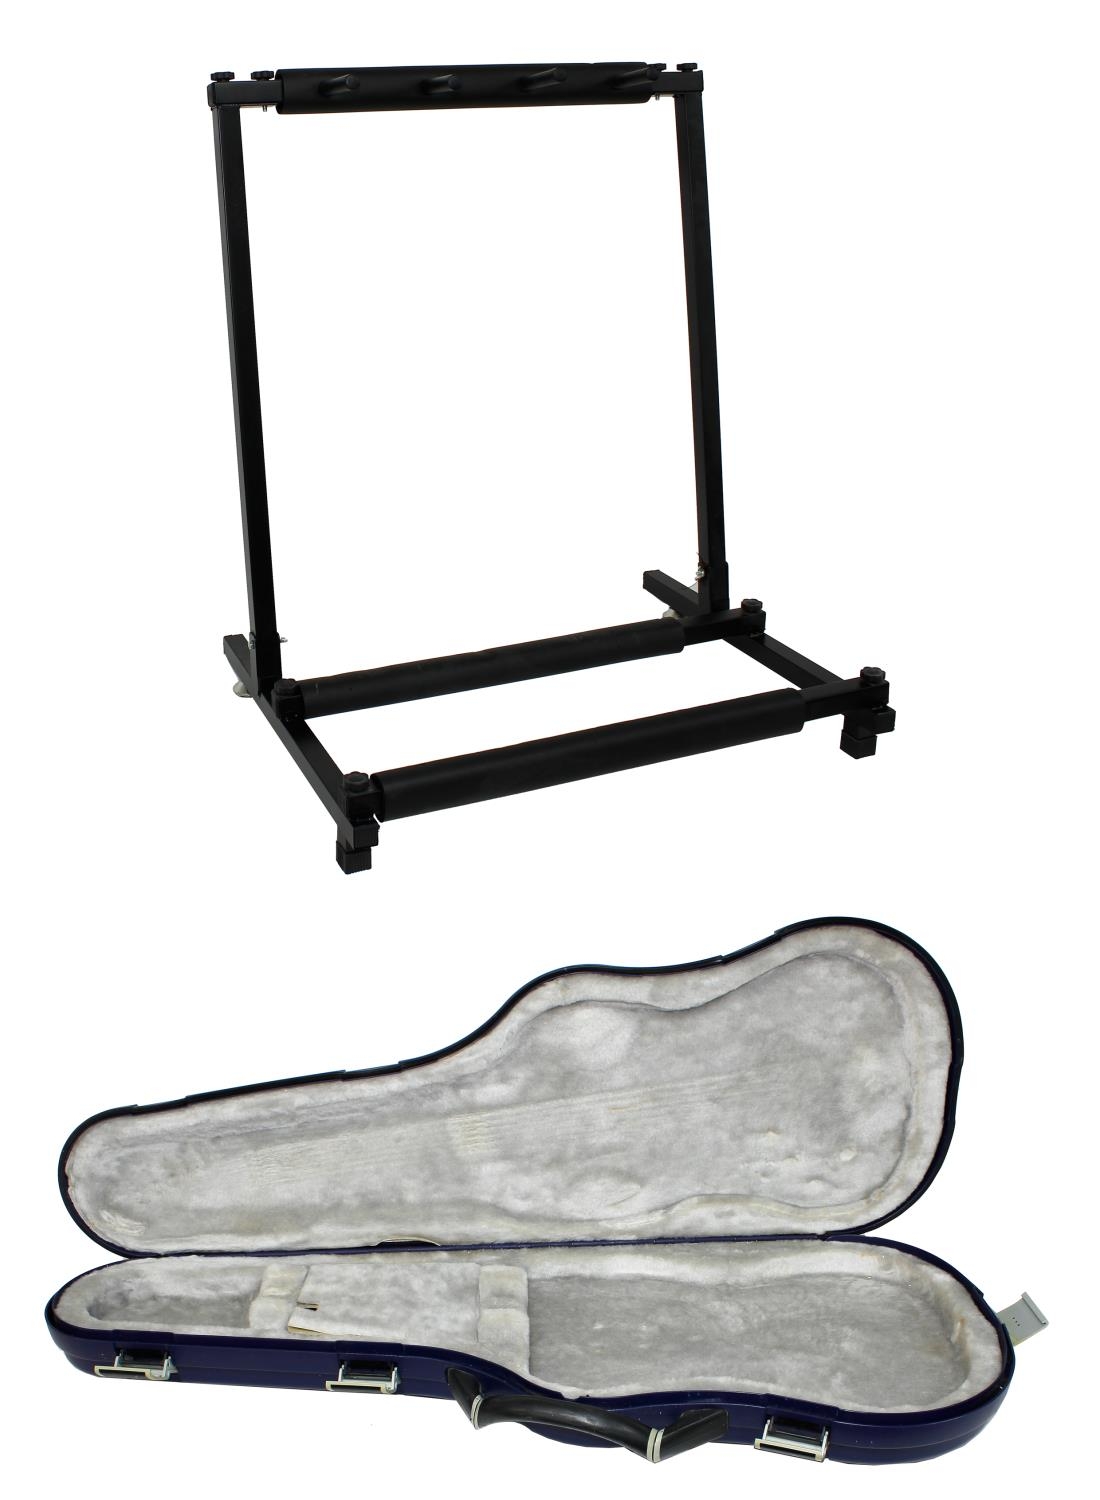 Studio Logic electric guitar hard case; together with a three position folding guitar rack stand